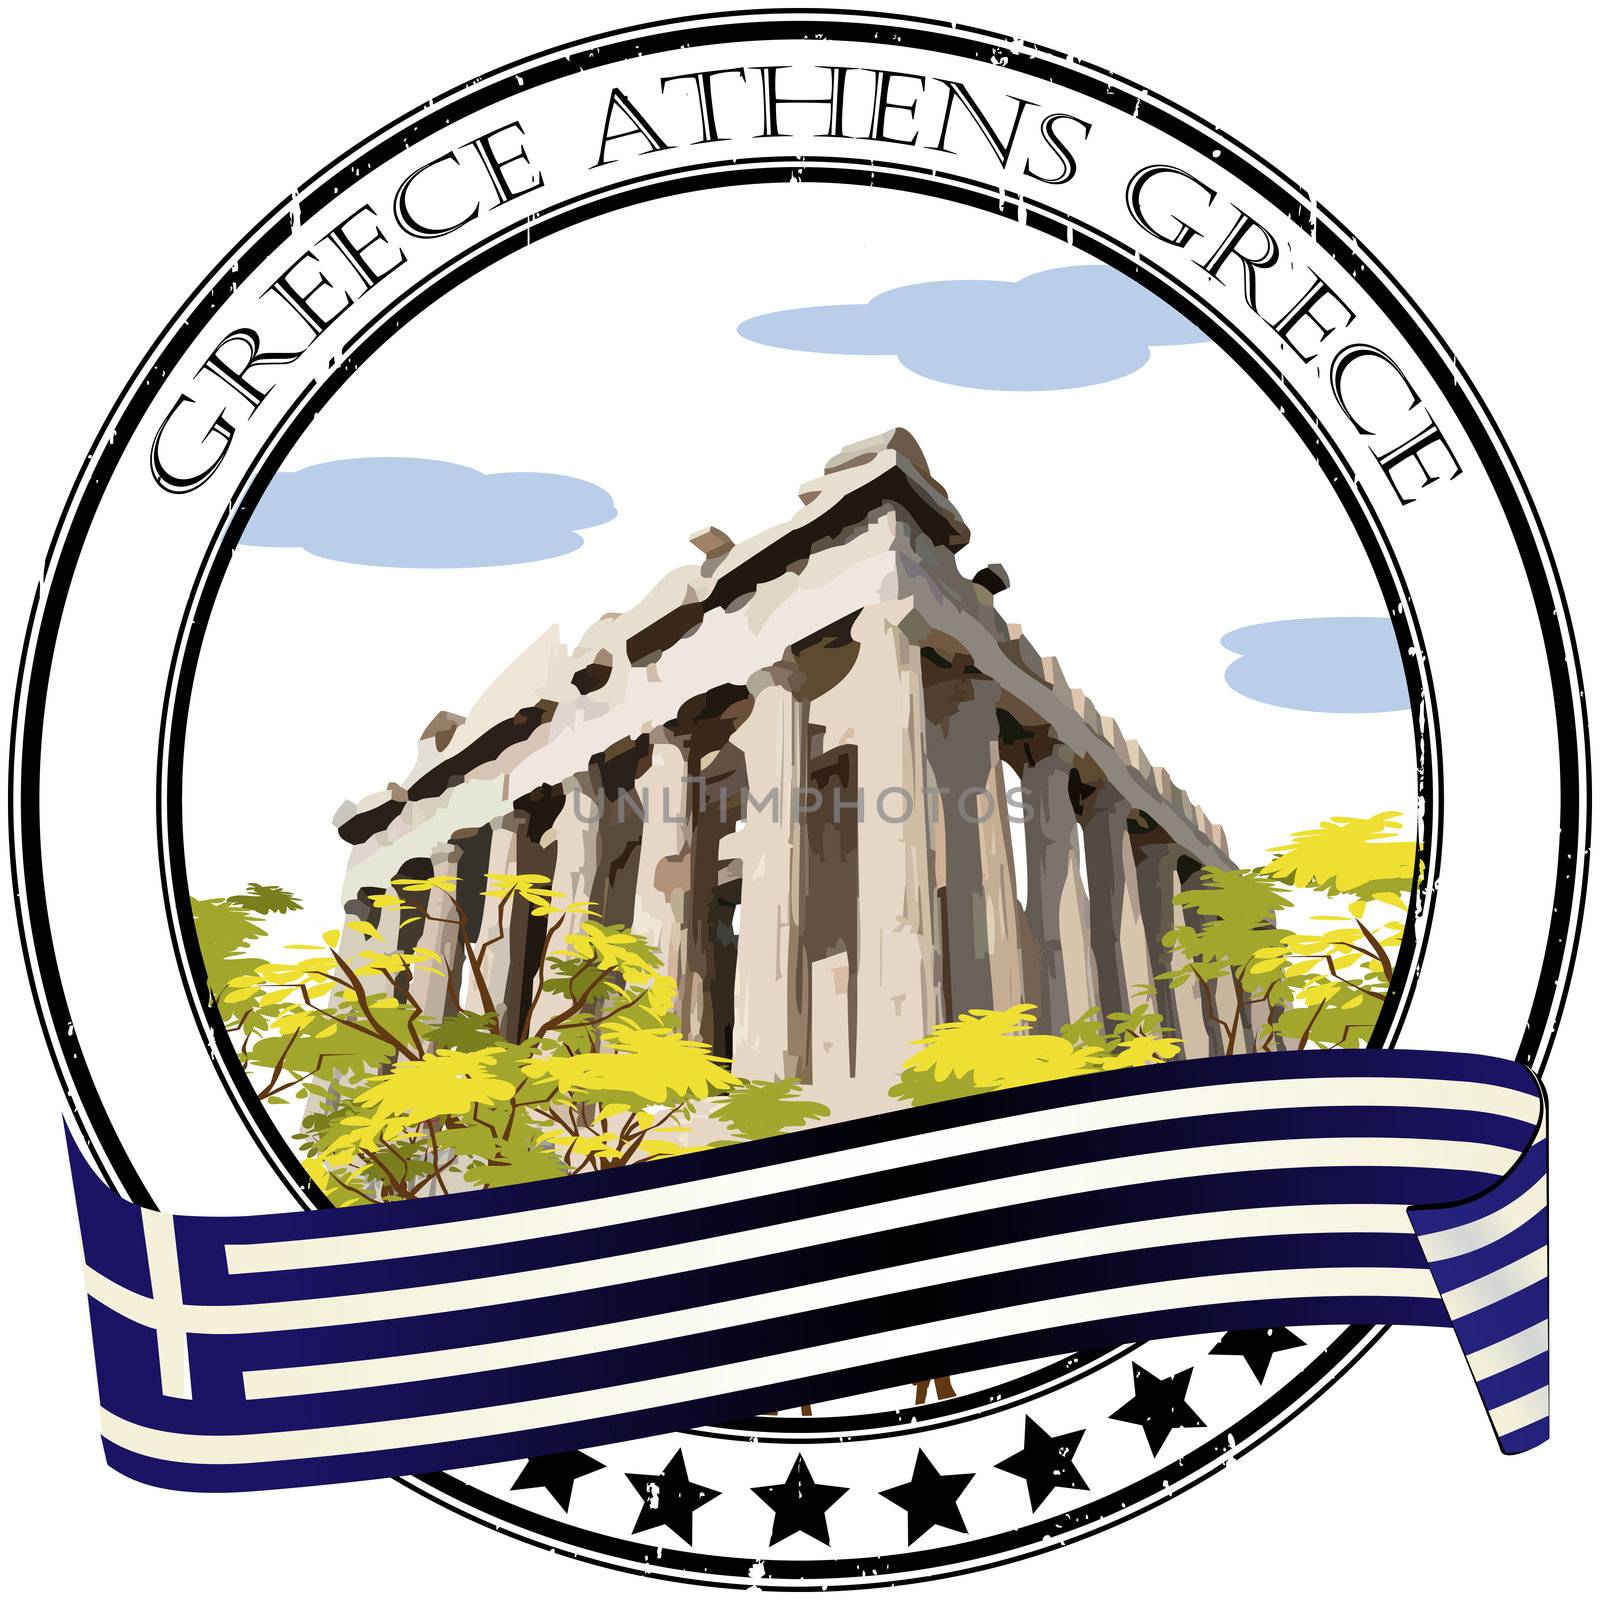 Athens grunge rubber stamp and flag